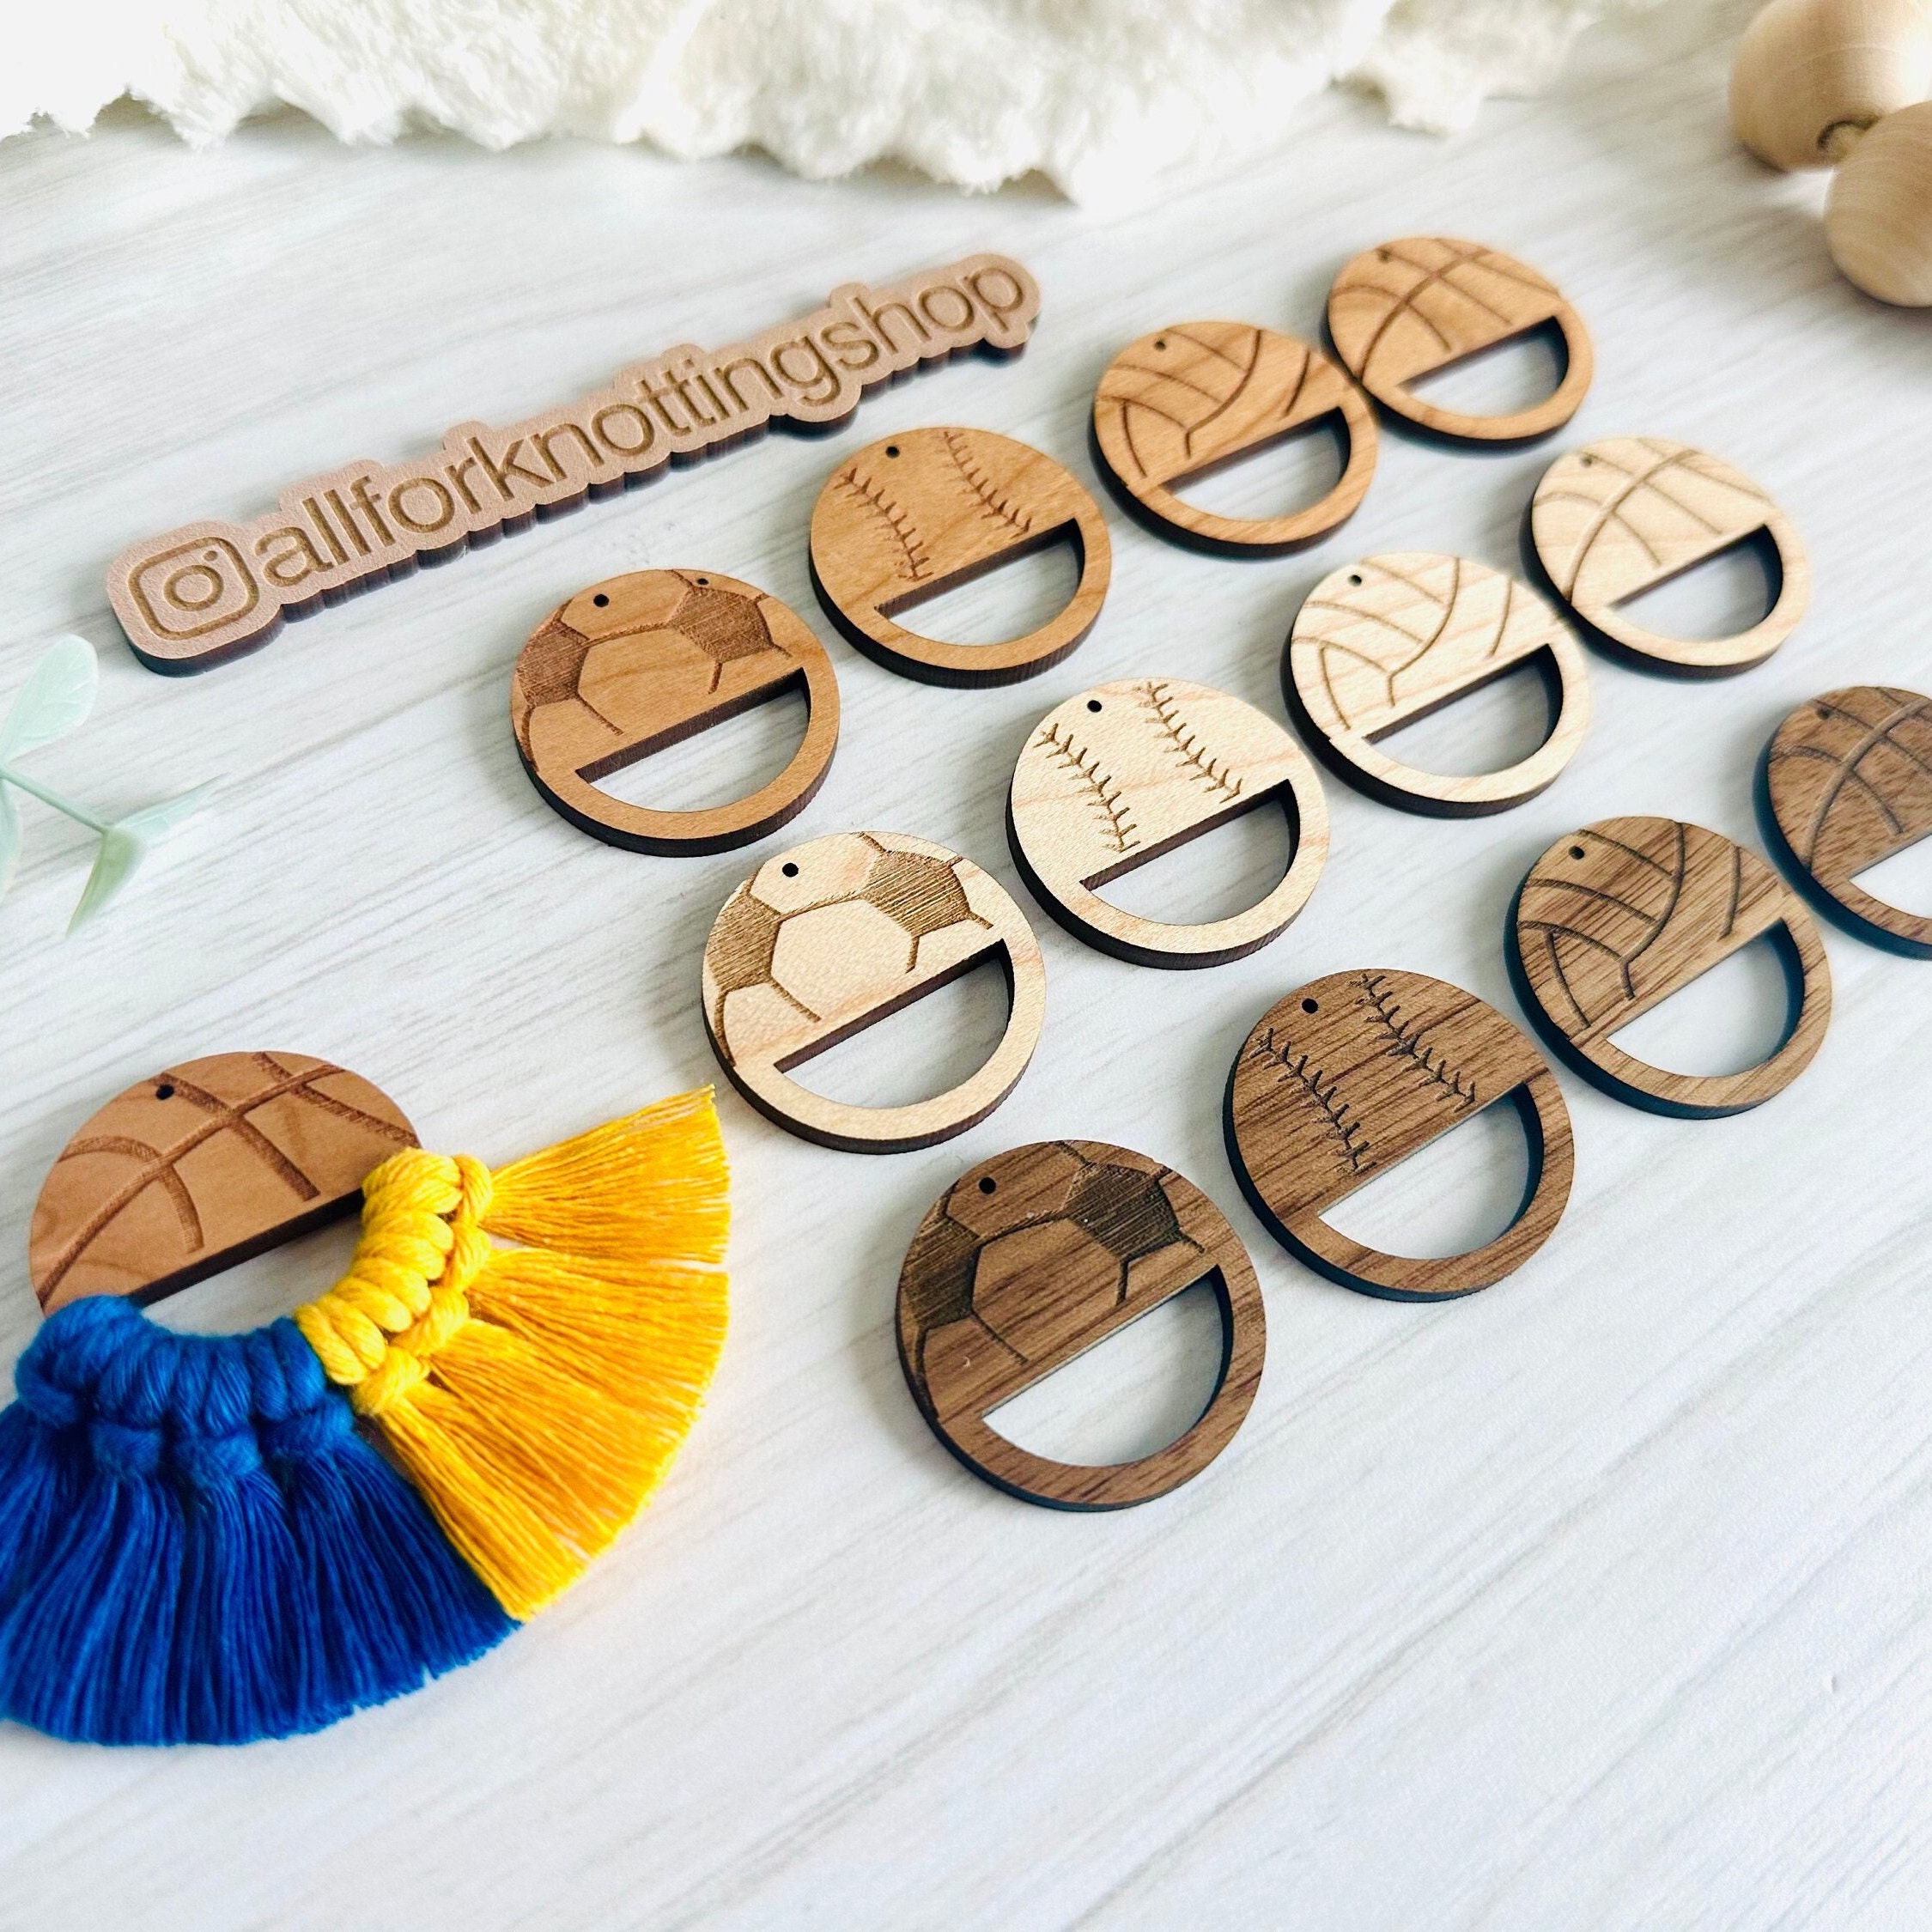 Wood Earring Findings,50 Pcs Unfinished Wood Earring Blanks Dangle Earrings Wood Charms with 60 Earring Hooks and 60 Jump Rings for Earrings Jewelry D